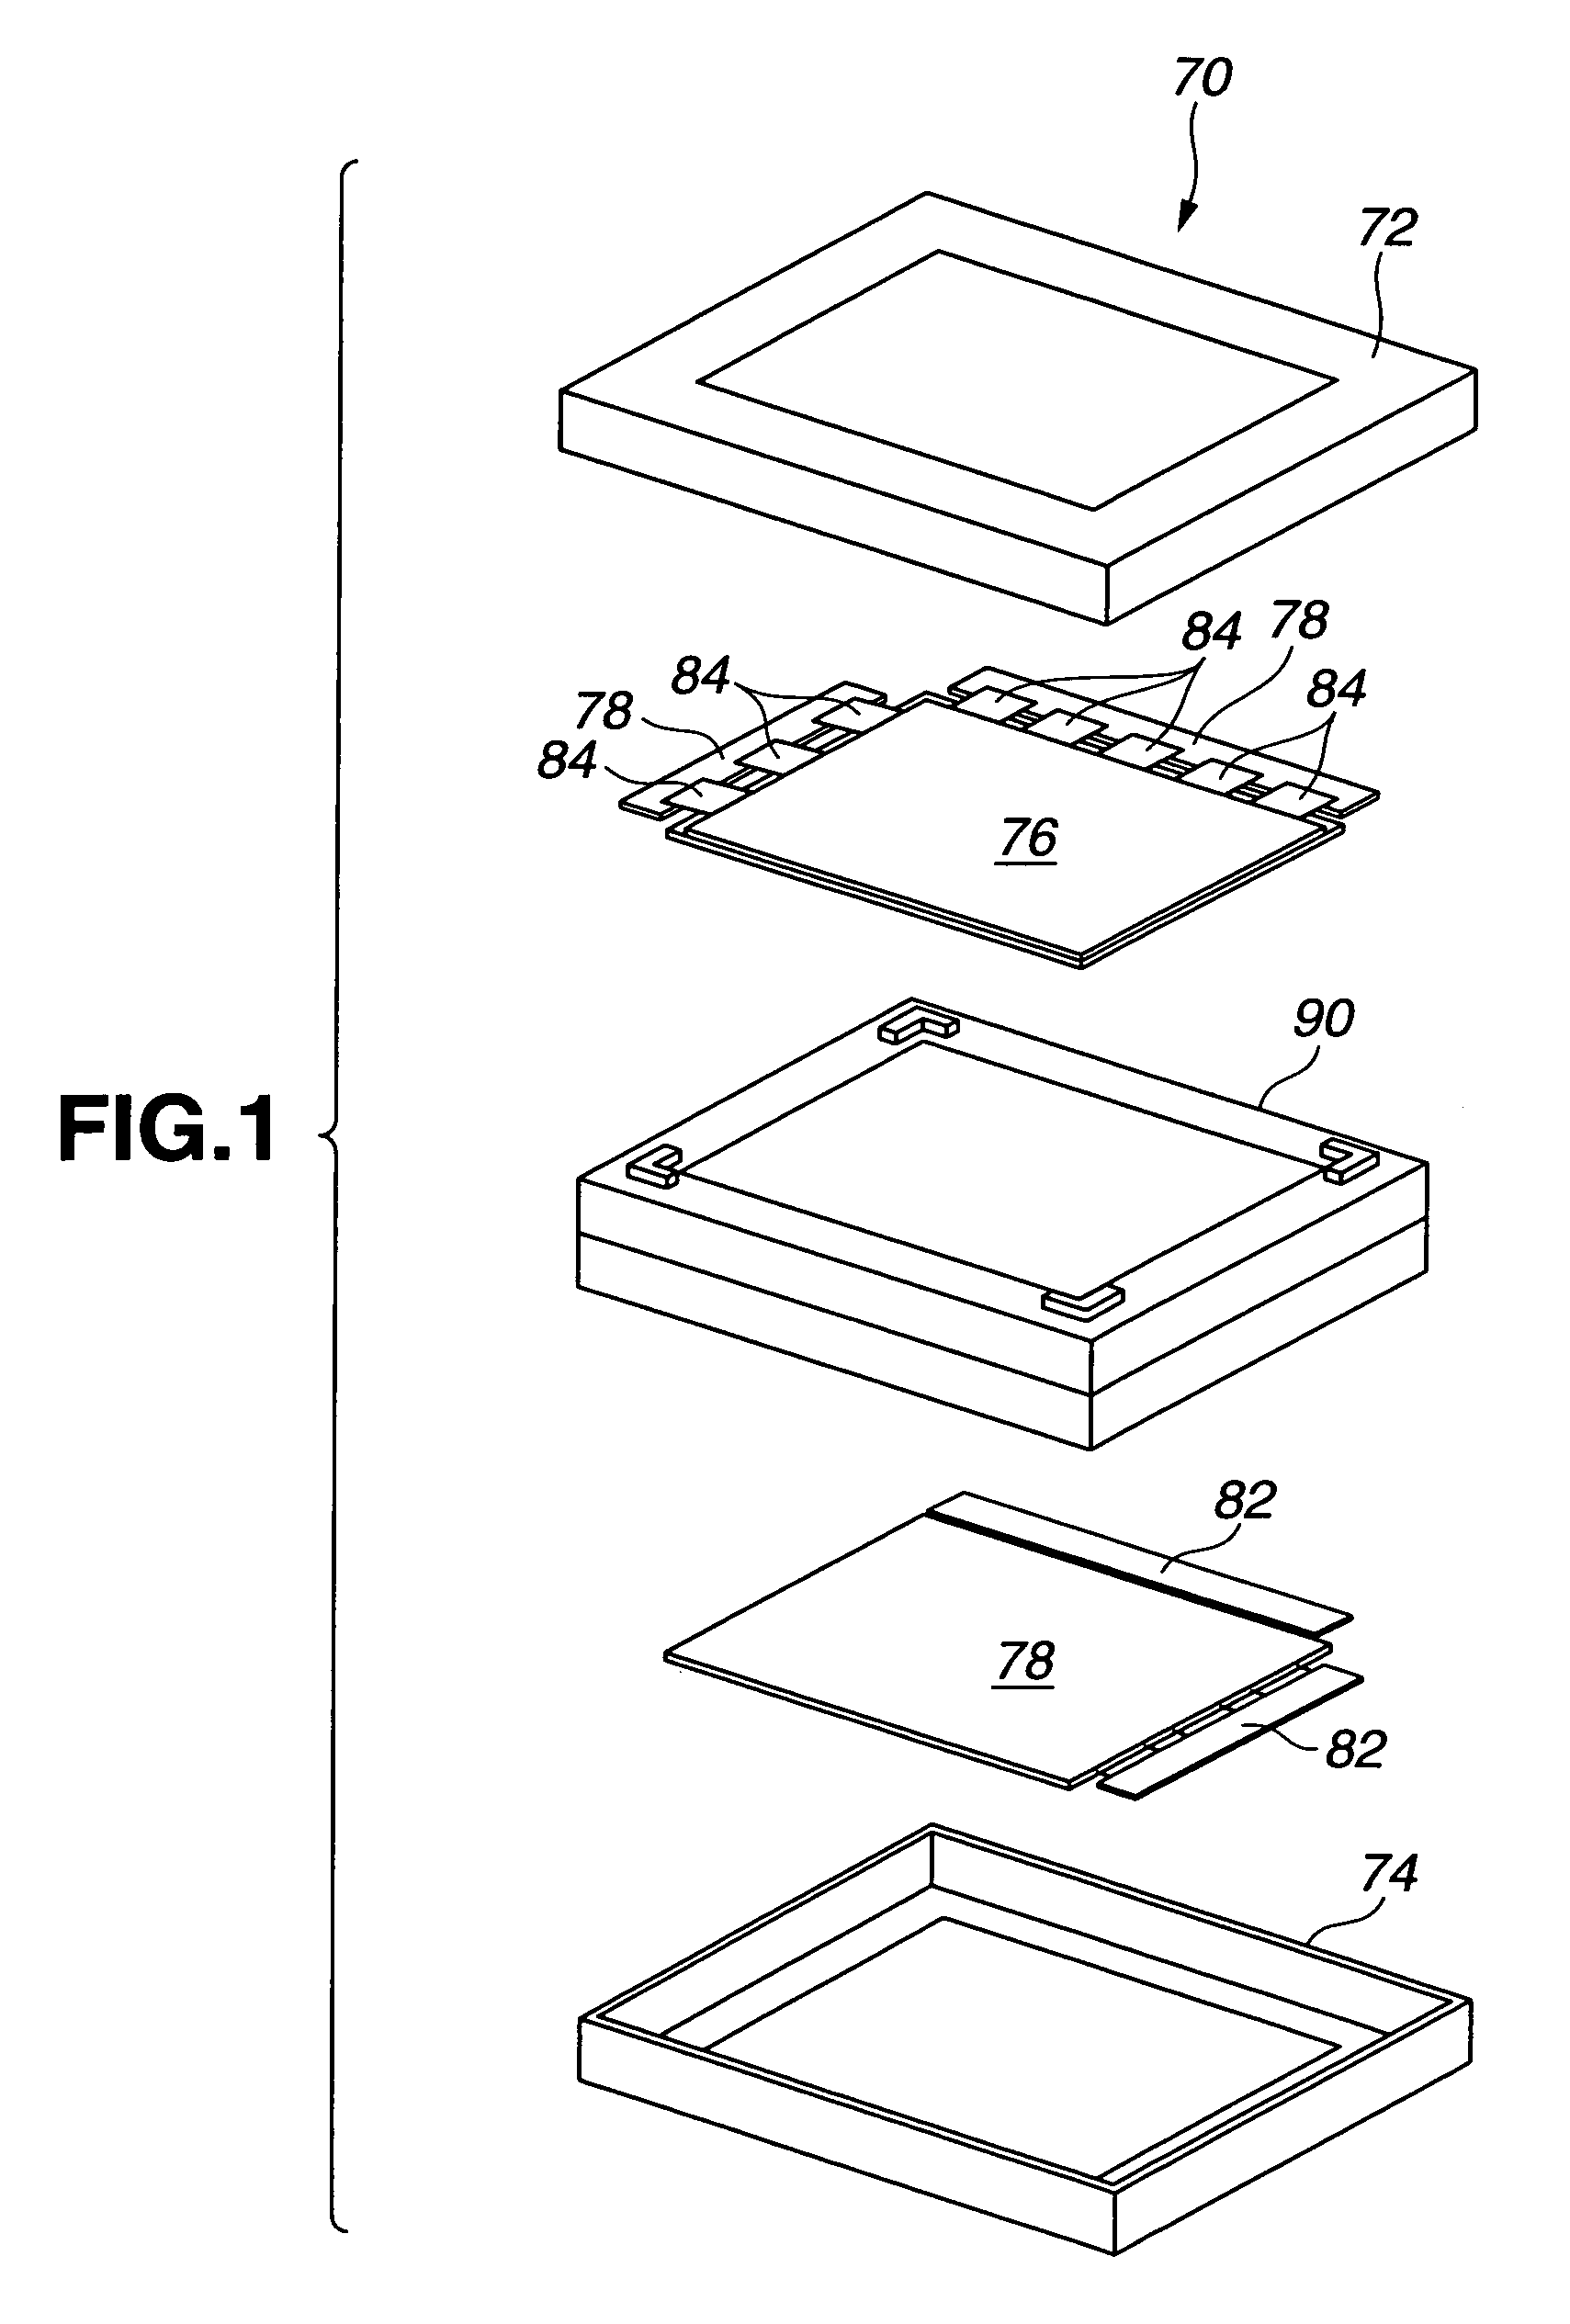 Backlight assembly for directly backlighting displays